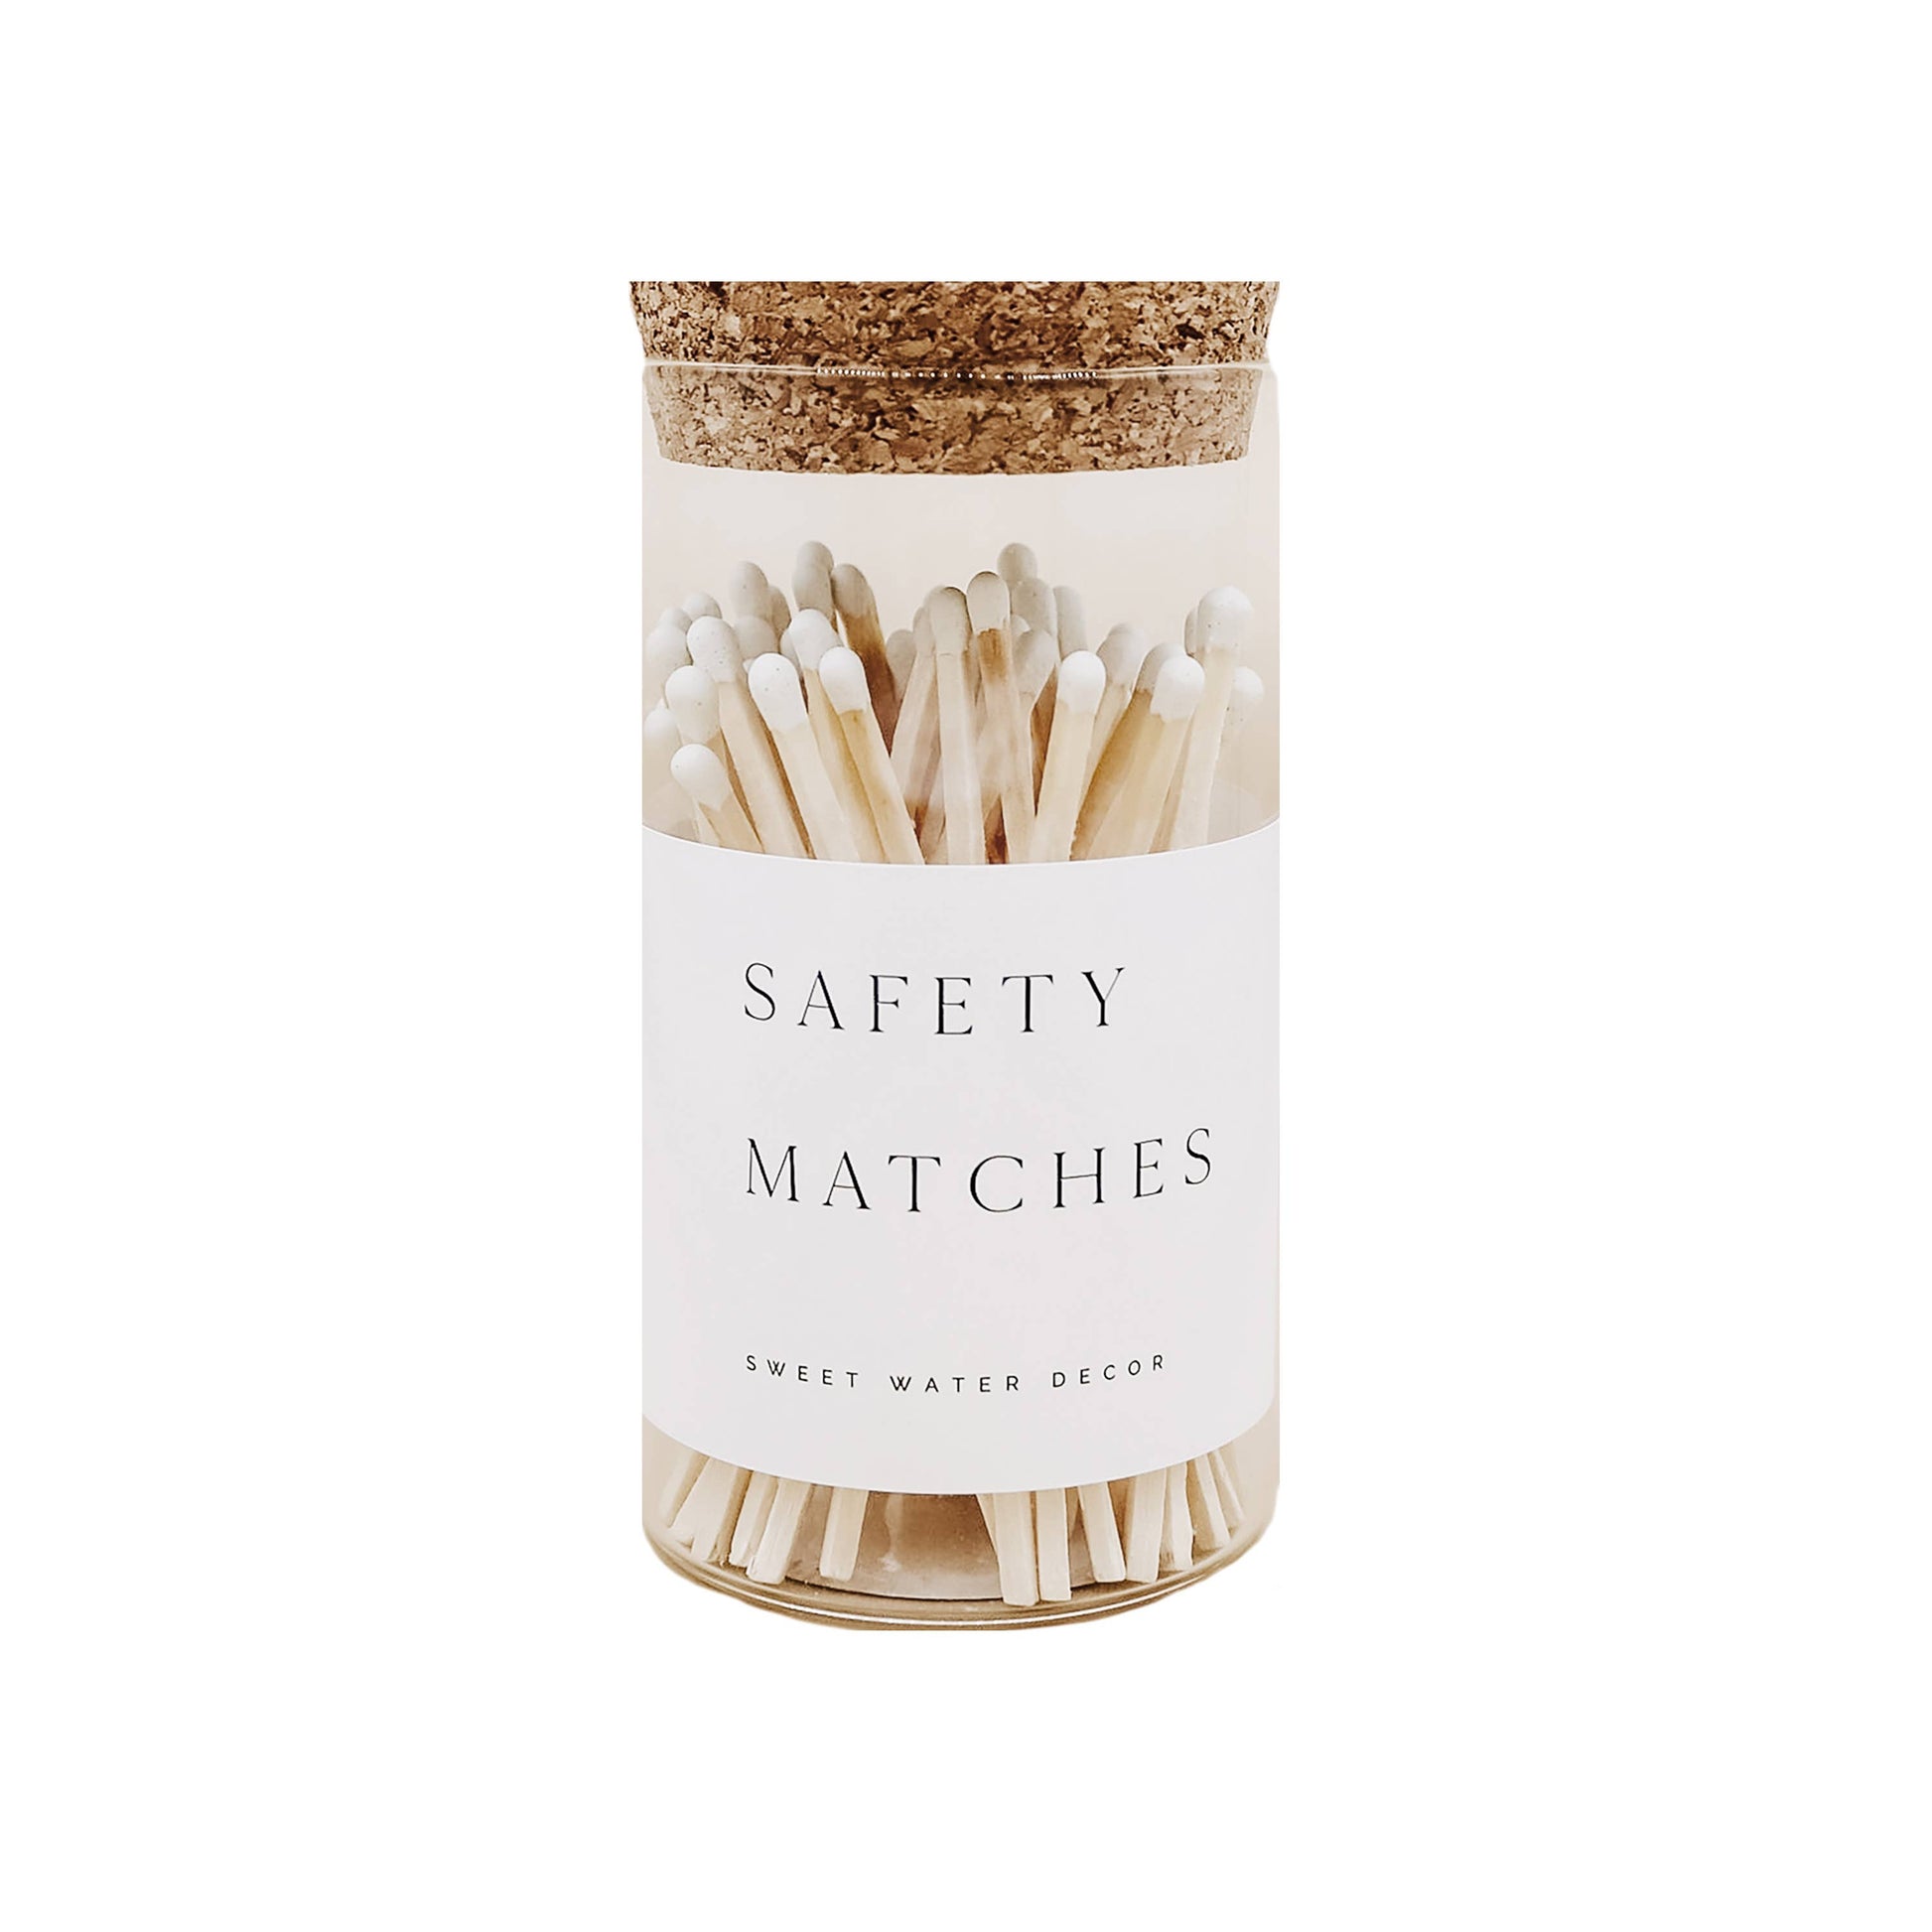 Medium Hearth Matches, White Tip - Home Decor & Gifts-Sweet Water Decor--The Twisted Chandelier